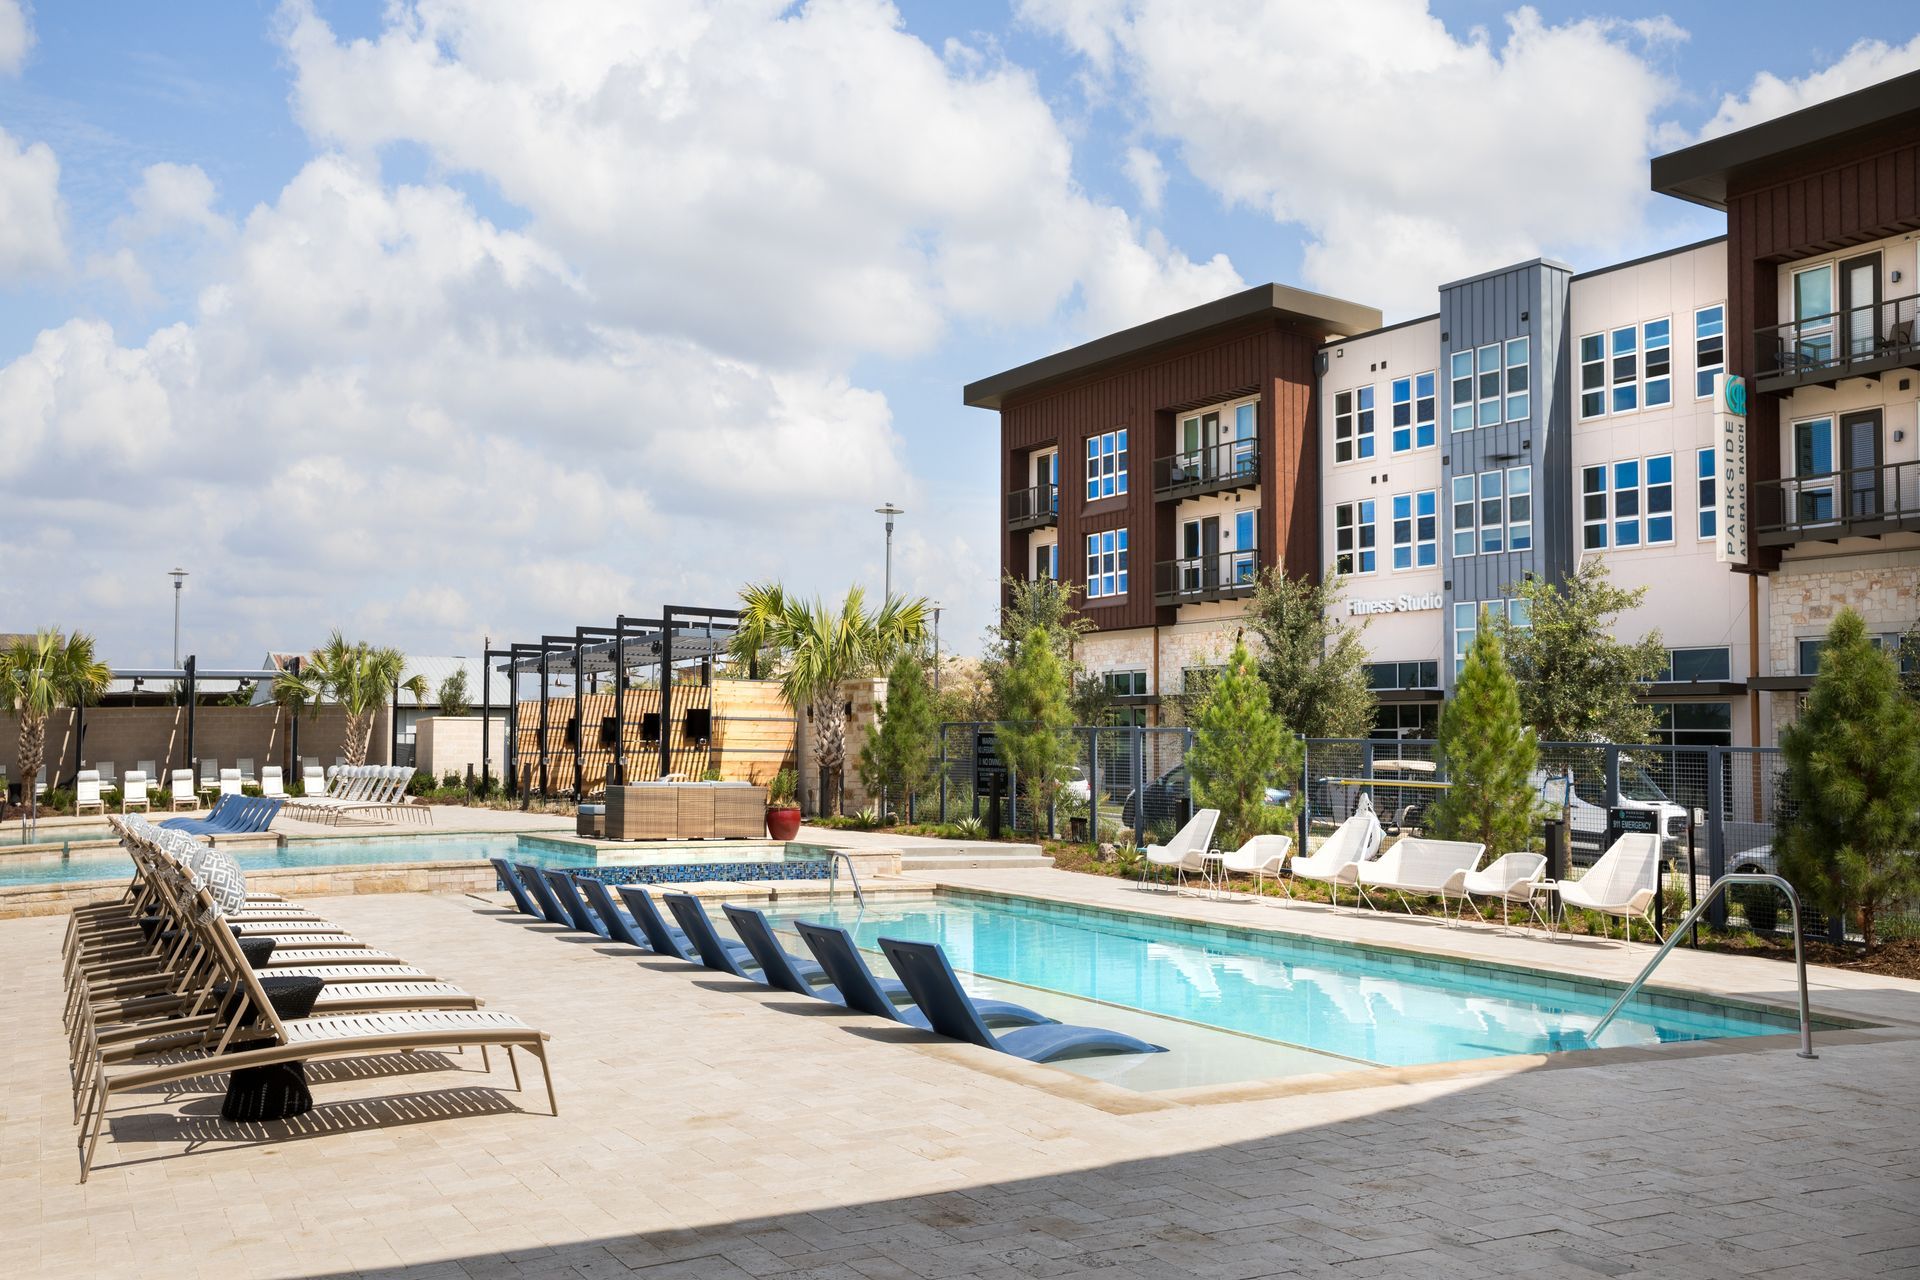 A large swimming pool in front of apartment buildings at Parkside at Craig Ranch.